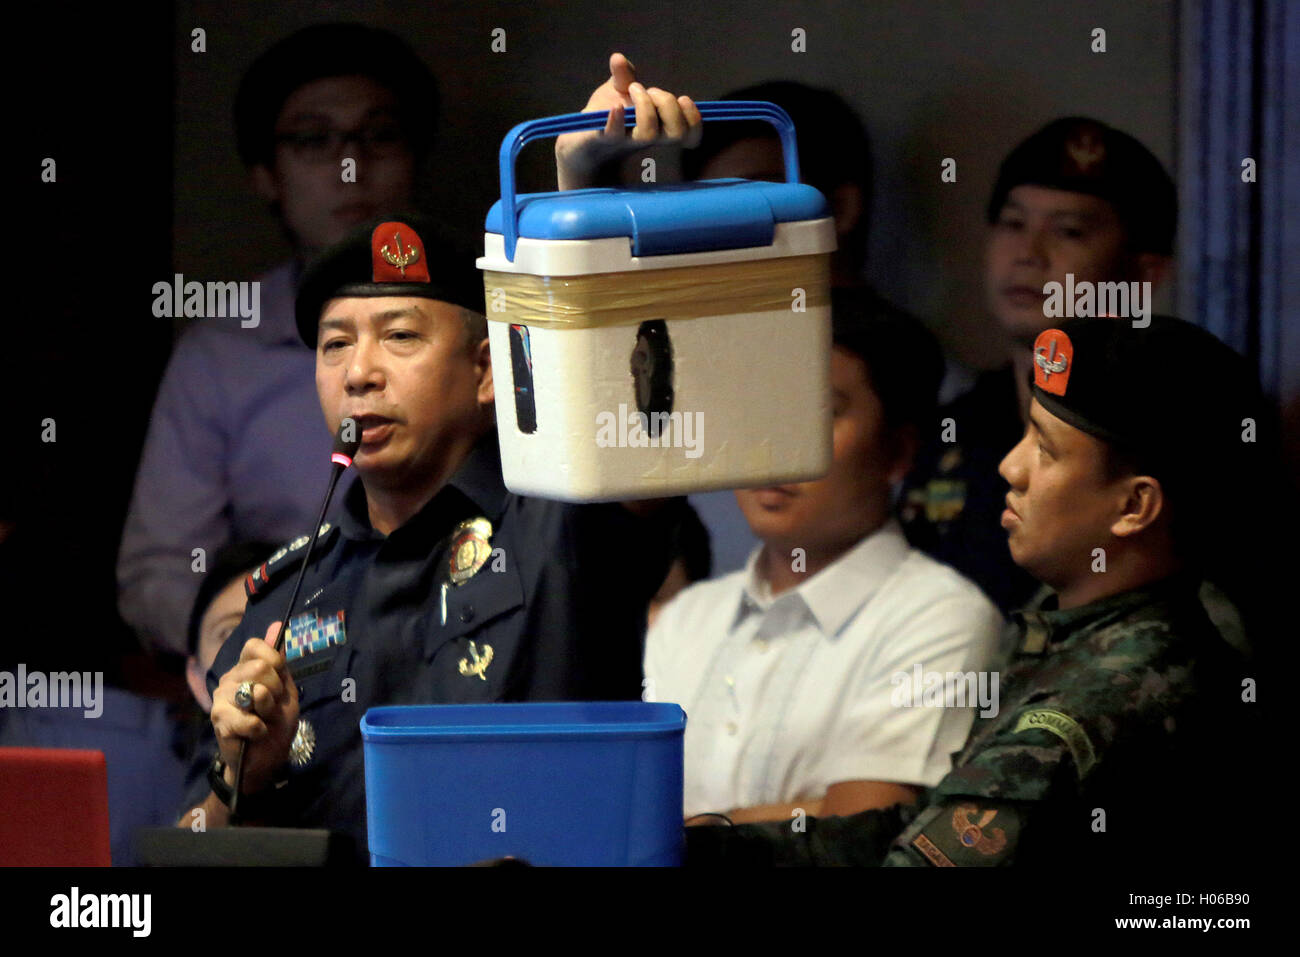 Quezon City, Philippines. 20th Sep, 2016. An official from the Philippine National Police Special Action Force (PNP-SAF) presents a mobile phone encased in a cooler to show how illegal contrabands are smuggled into the New Bilibid Prison (NBP) during a hearing on the illegal drug trade at the Philippine House of Representatives in Quezon City, the Philippines, Sept. 20, 2016. © Rouelle Umali/Xinhua/Alamy Live News Stock Photo